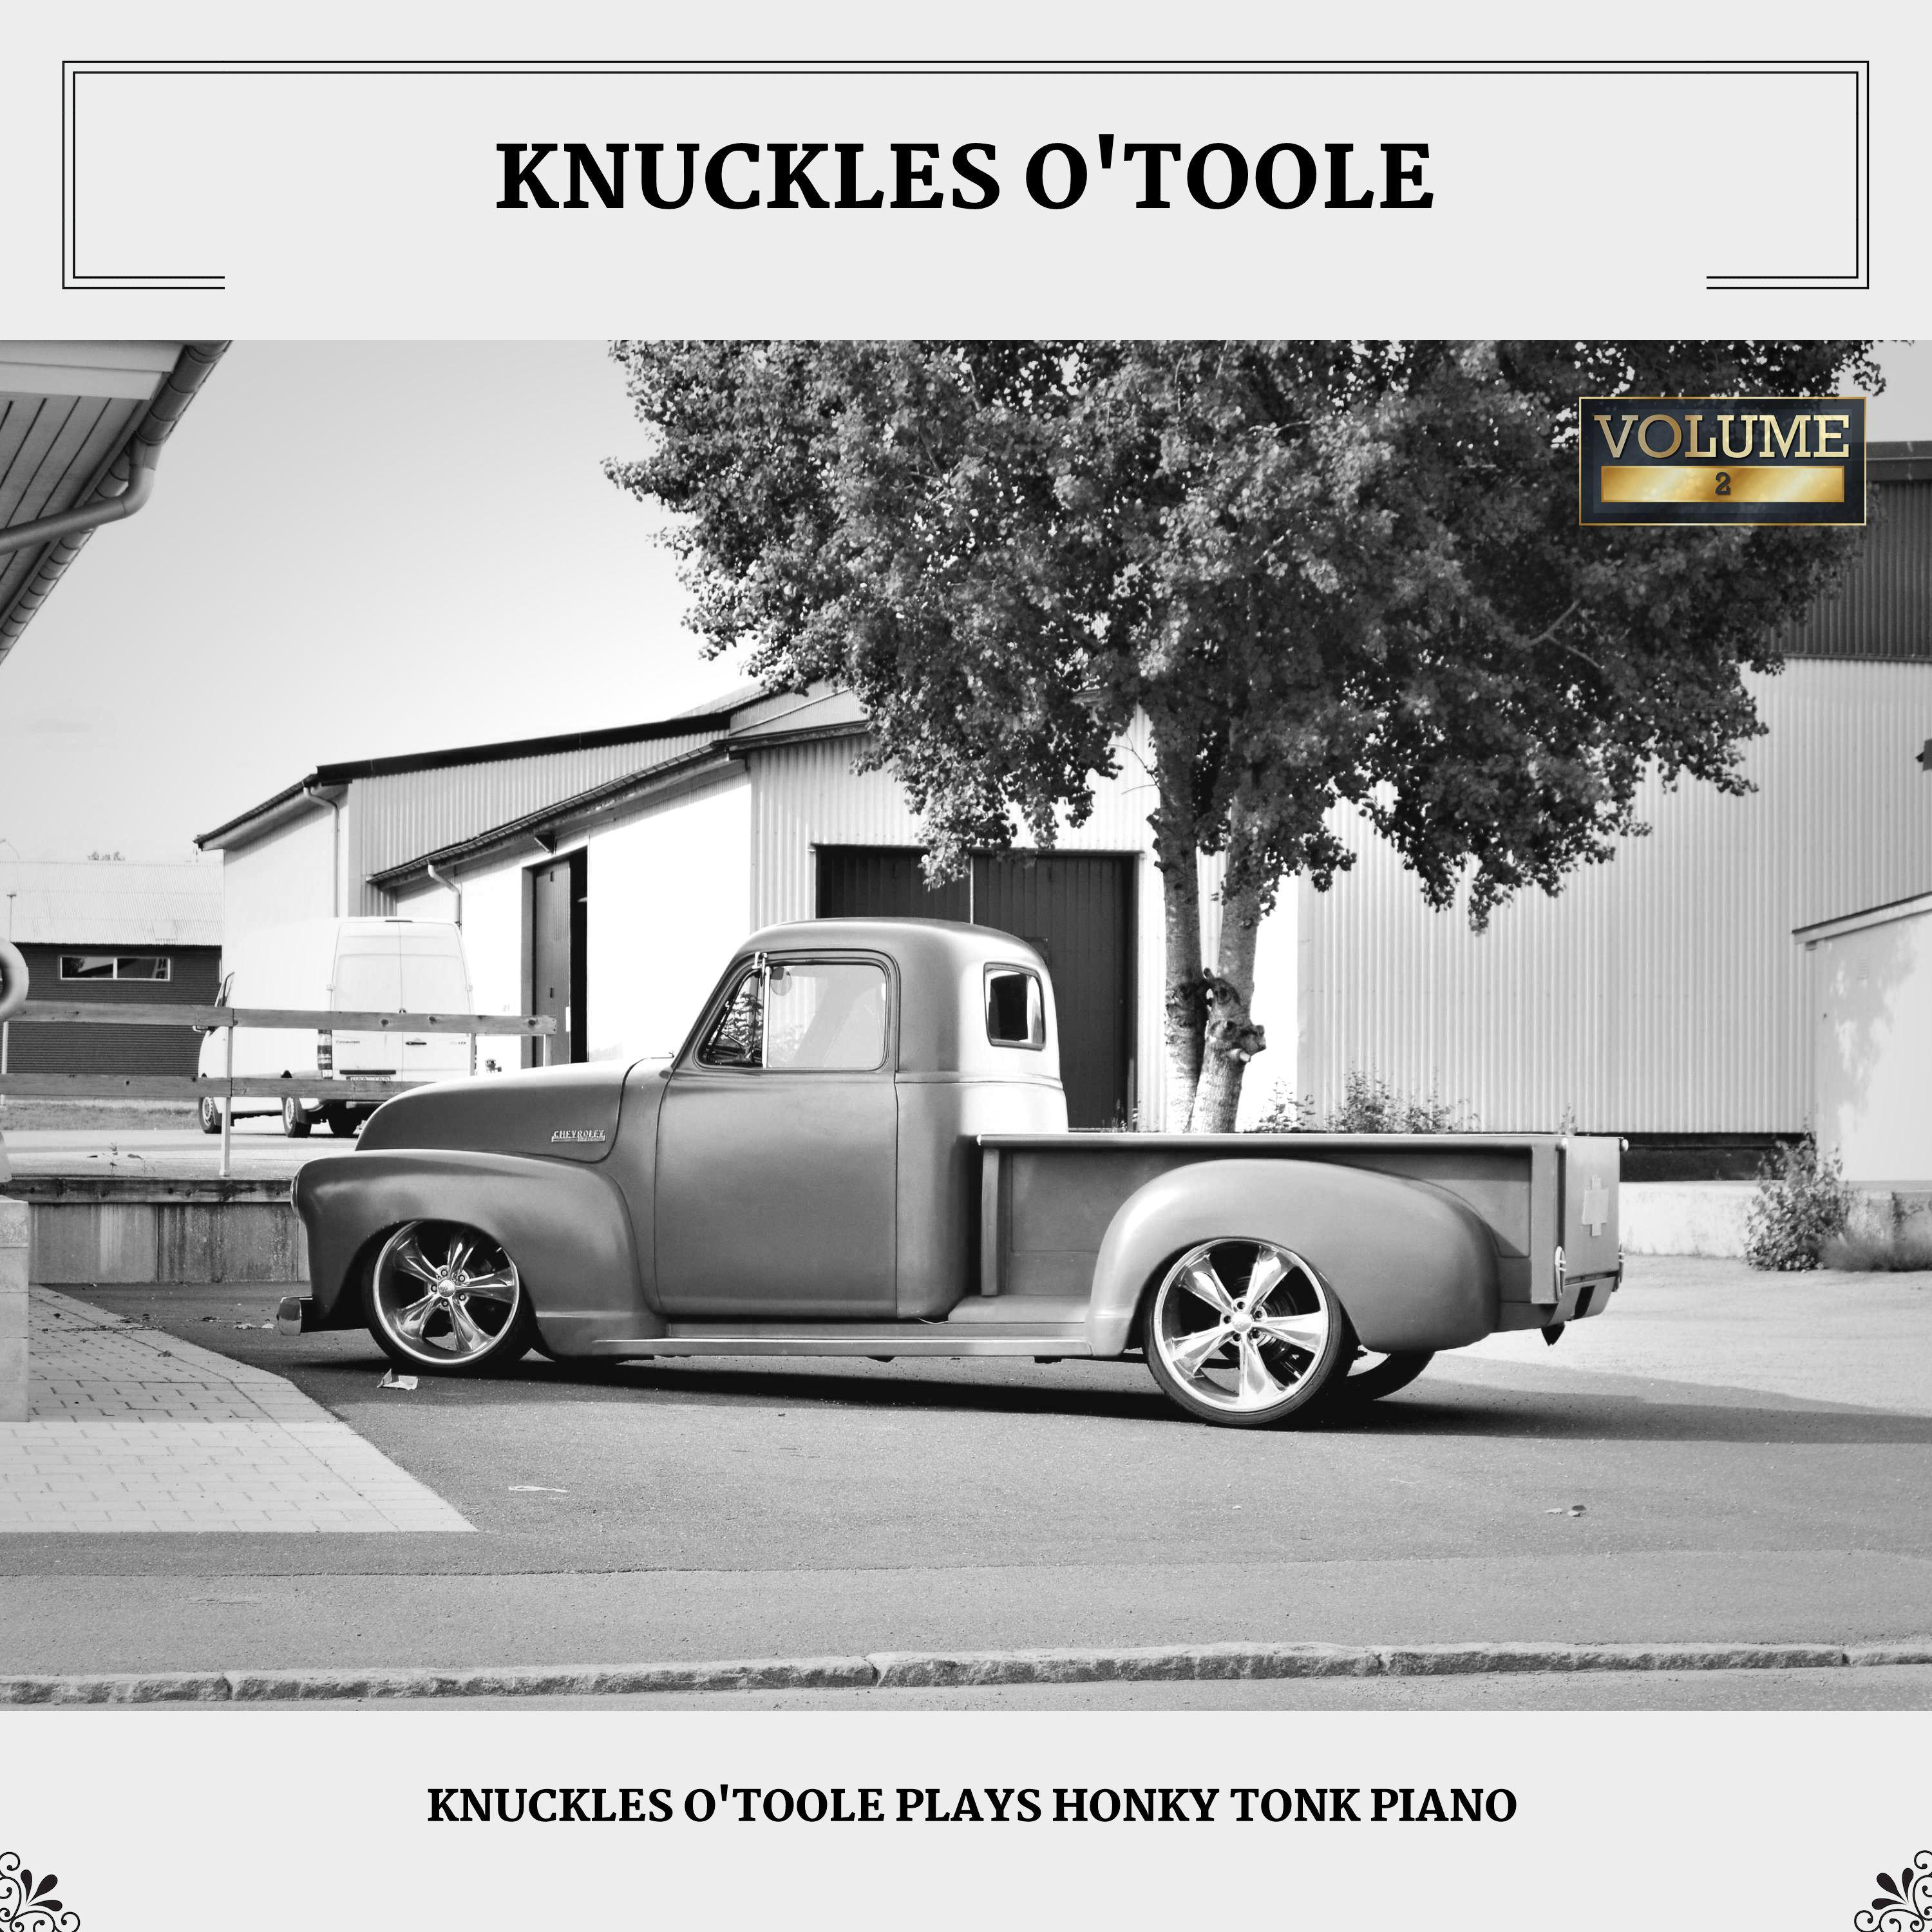 Knuckles O'Toole Plays Honky Tonk Piano (Volume 2)